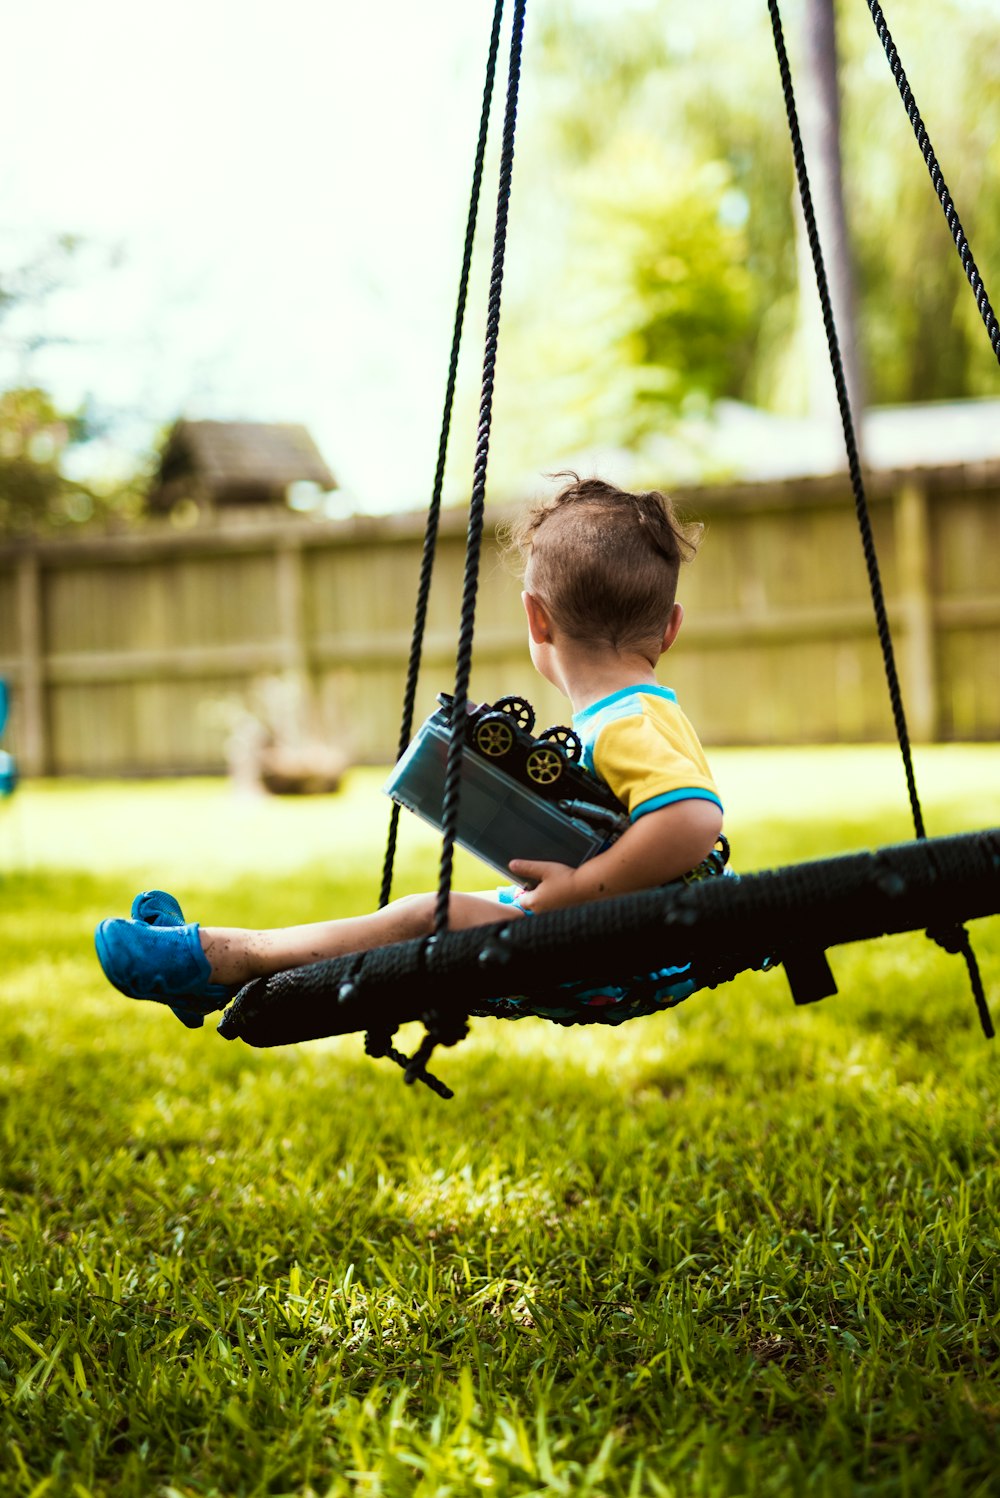 boy in red shirt riding on swing during daytime